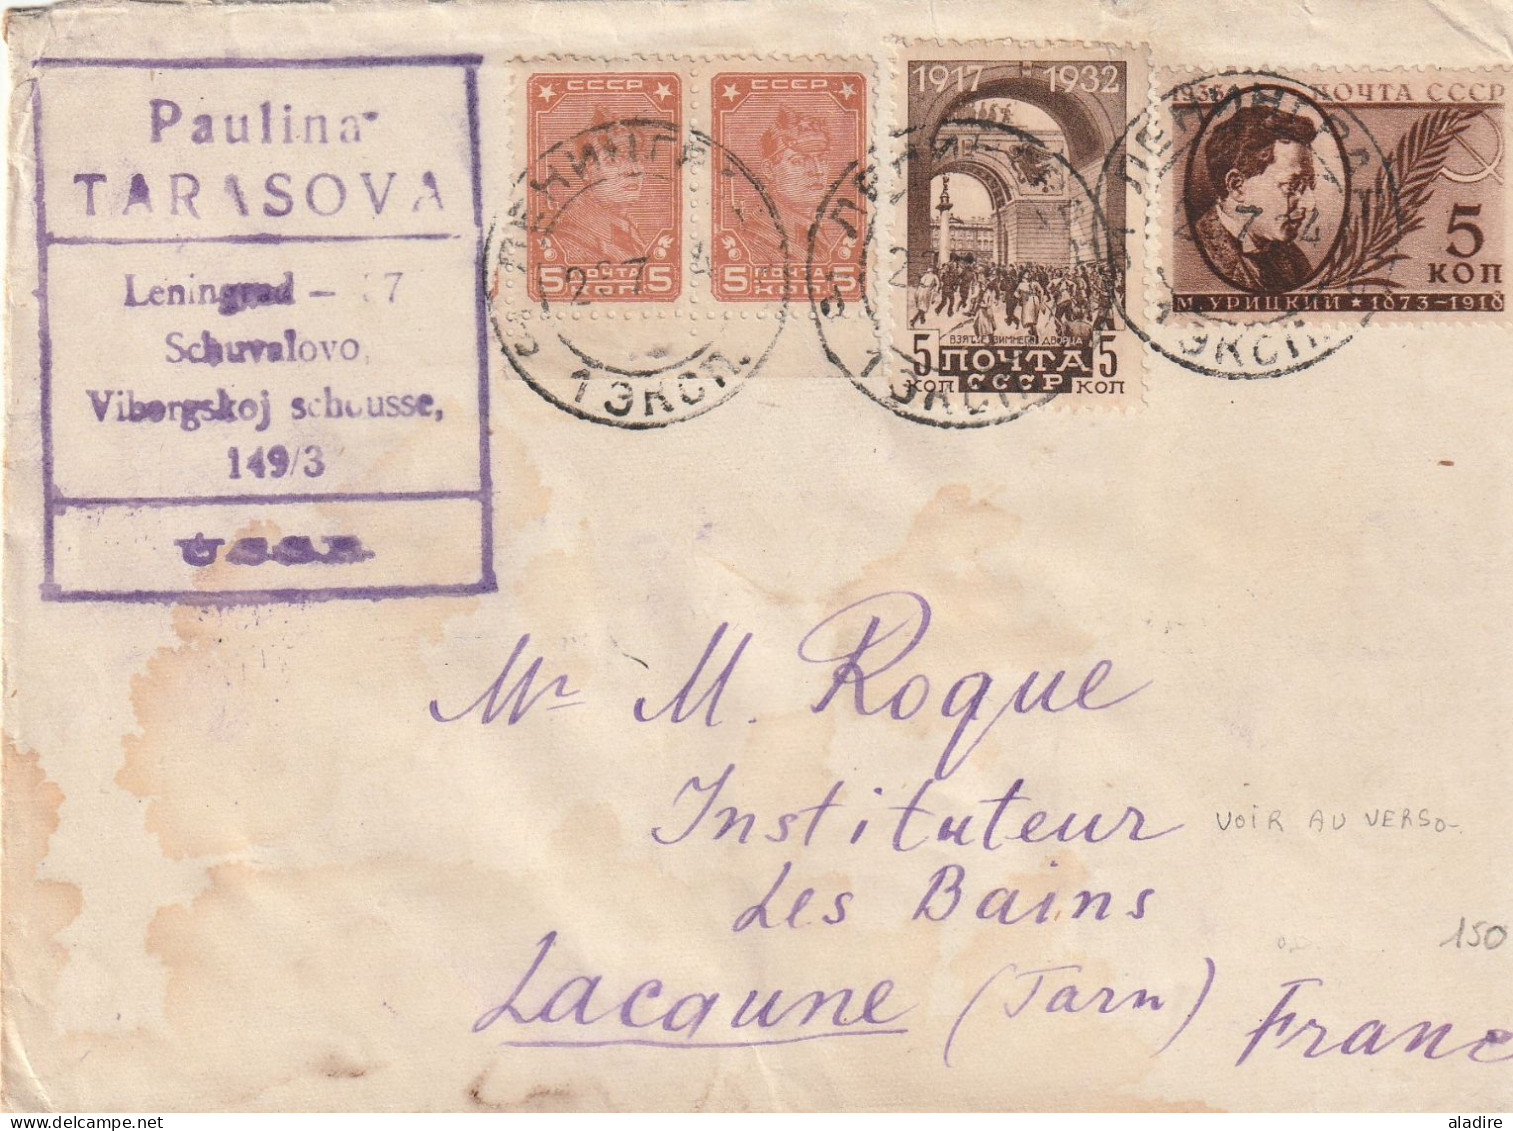 1891 - 1934 - 15 covers (1 front), cards and stationery  with stamps - 30 scans